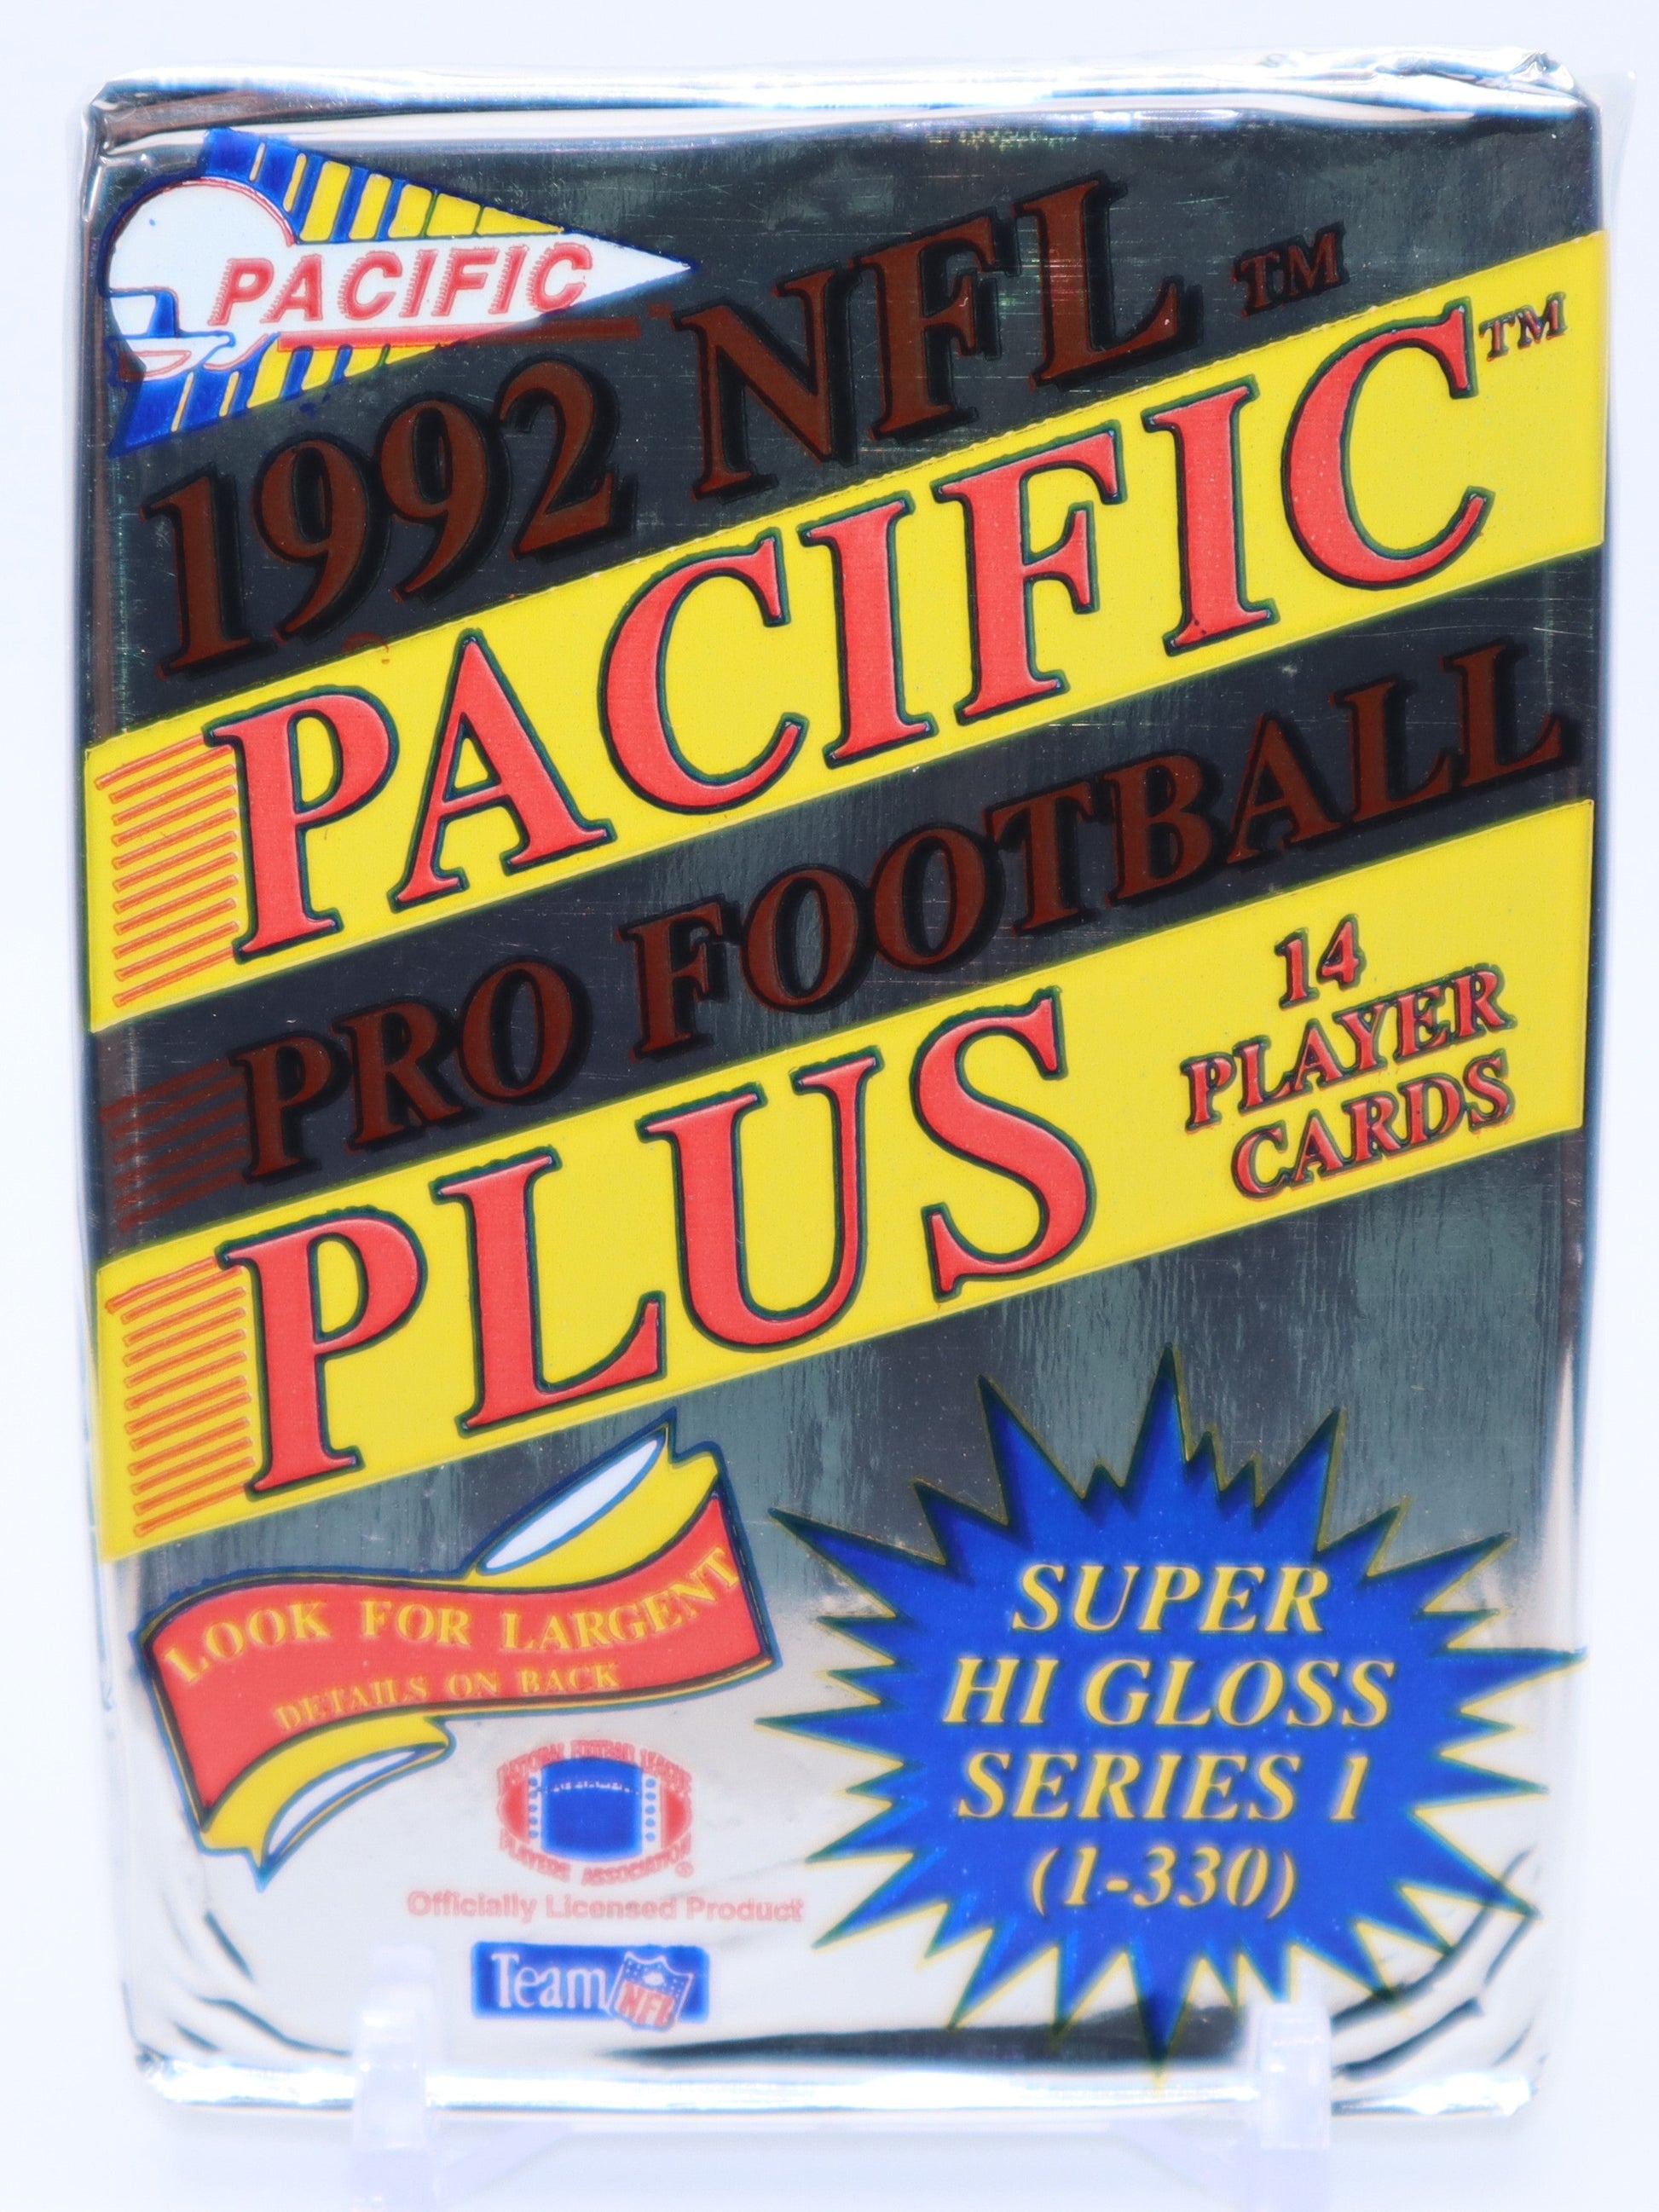 1992 Pacific Plus Series 1 Football Cards Wax Pack - Collectibles